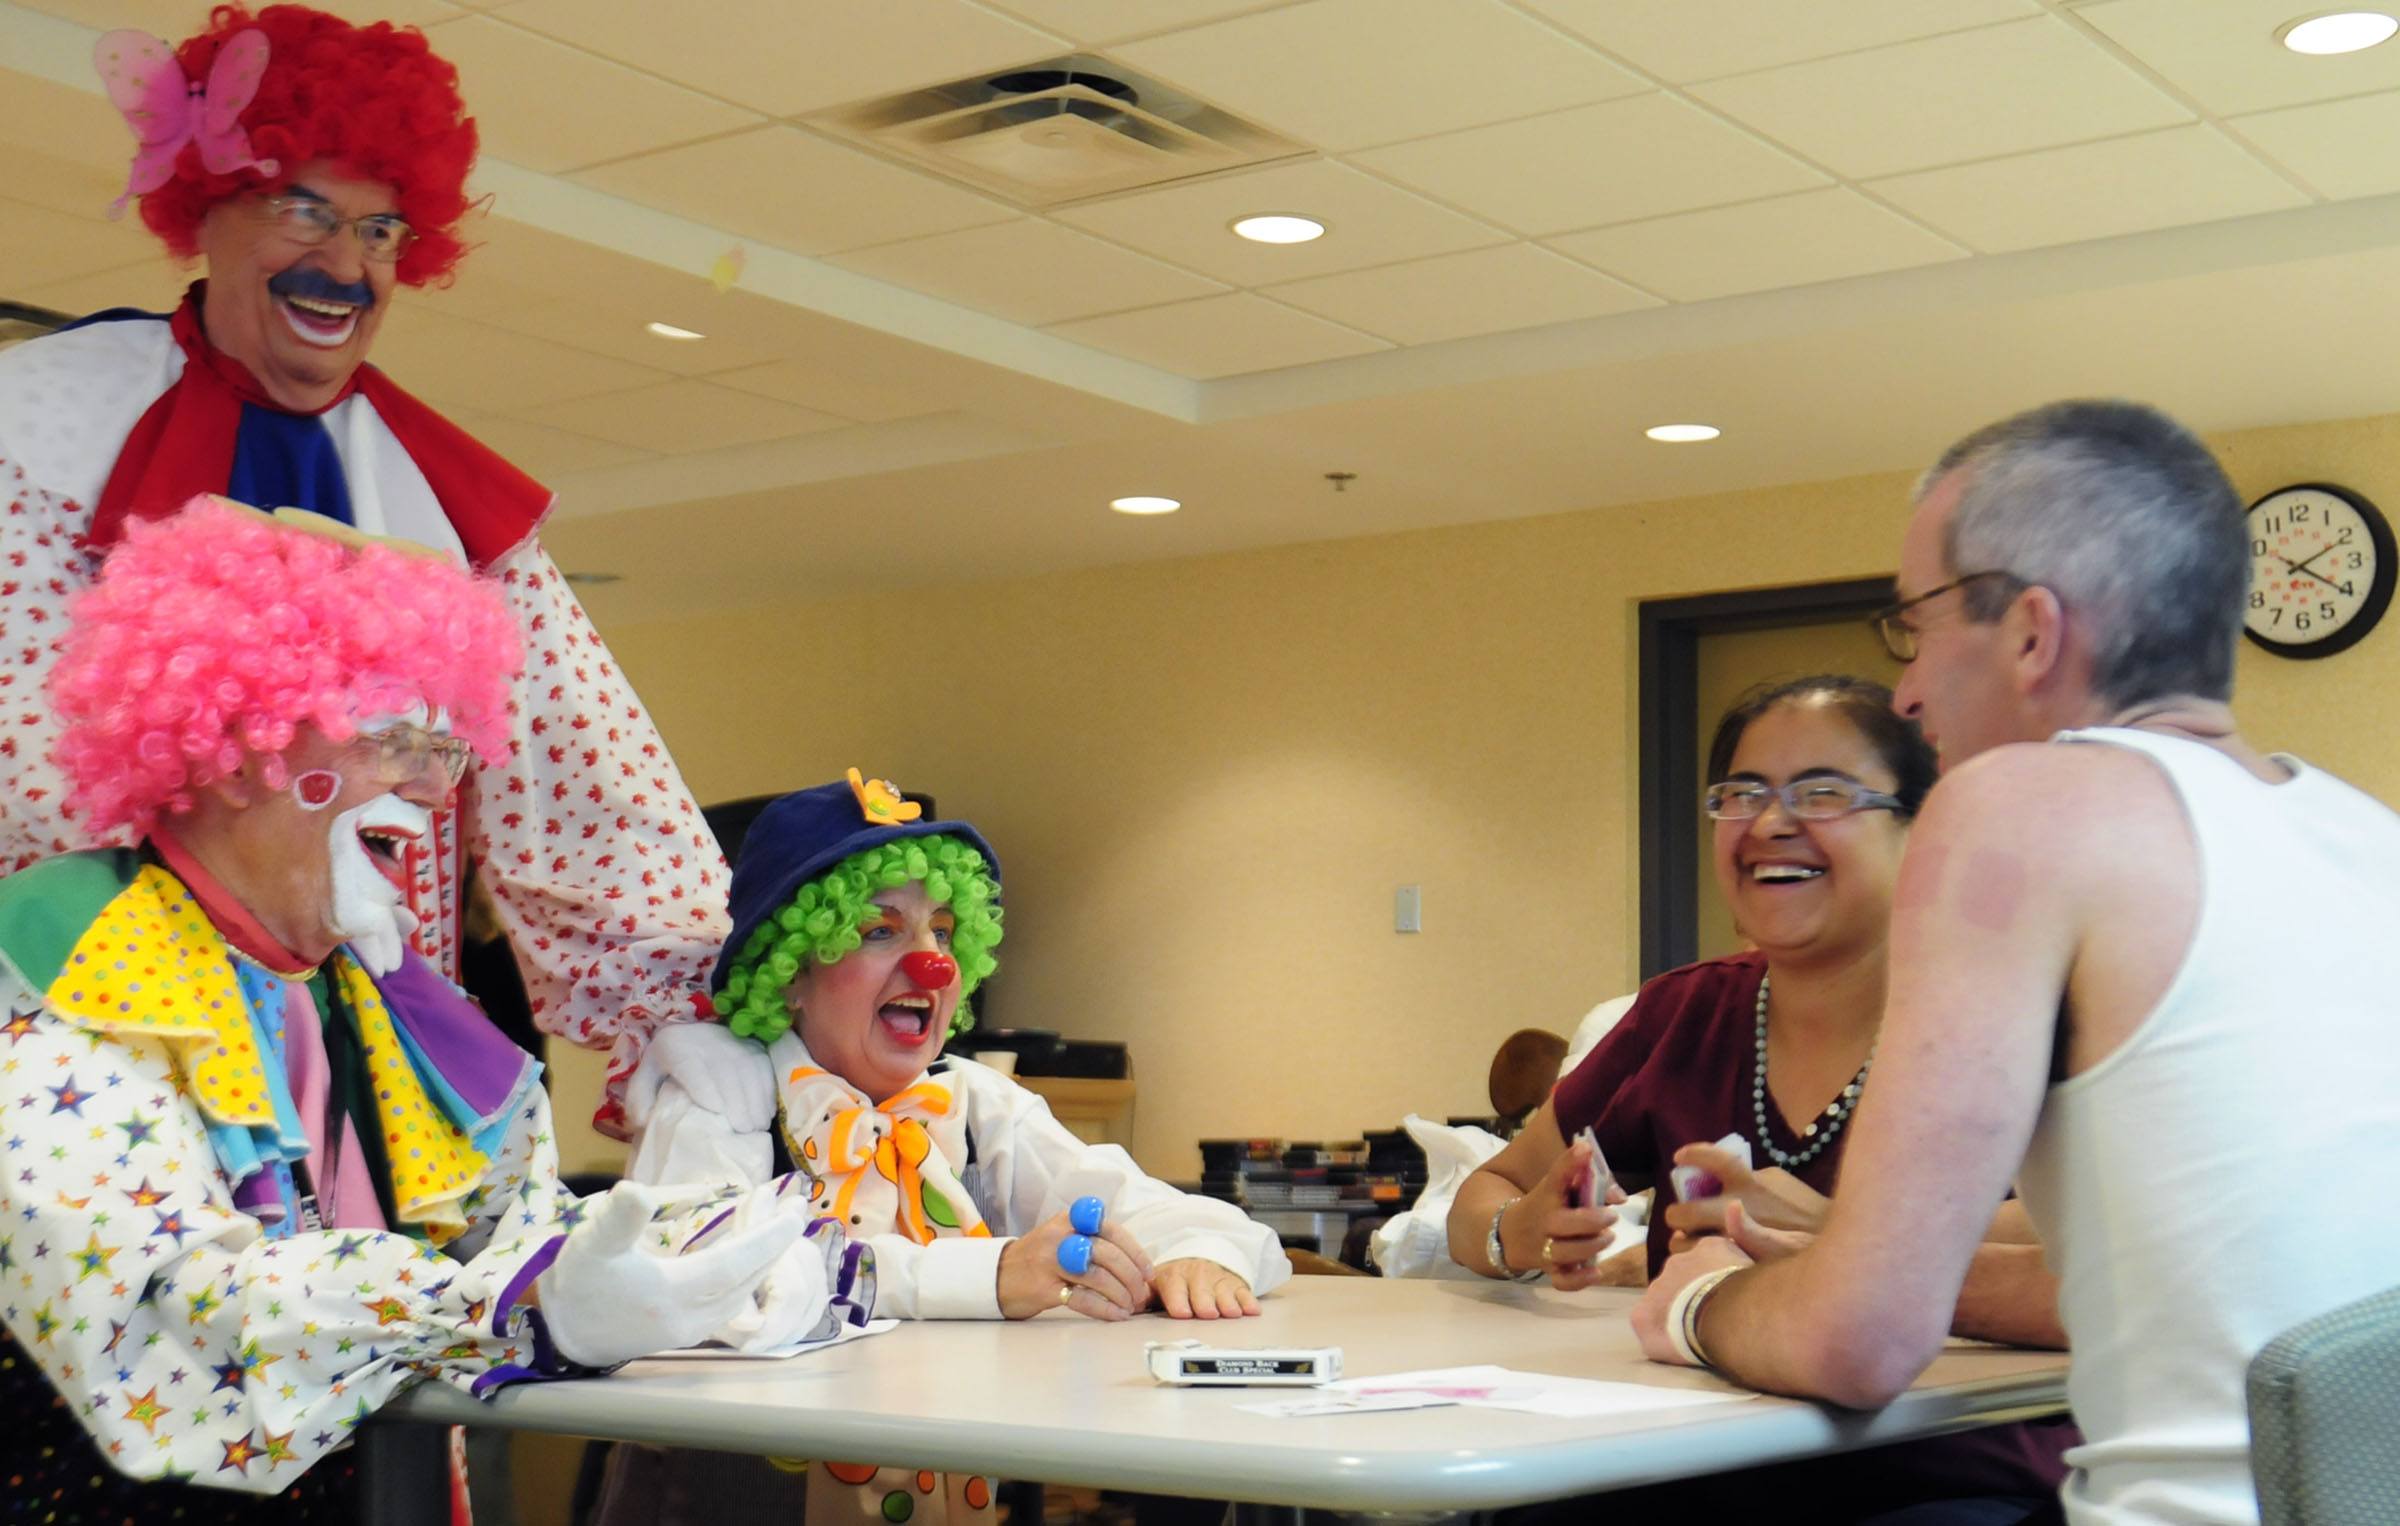 A two day workshop was held at the Red Deer Regional Hospital this past week for the Caring Clowns